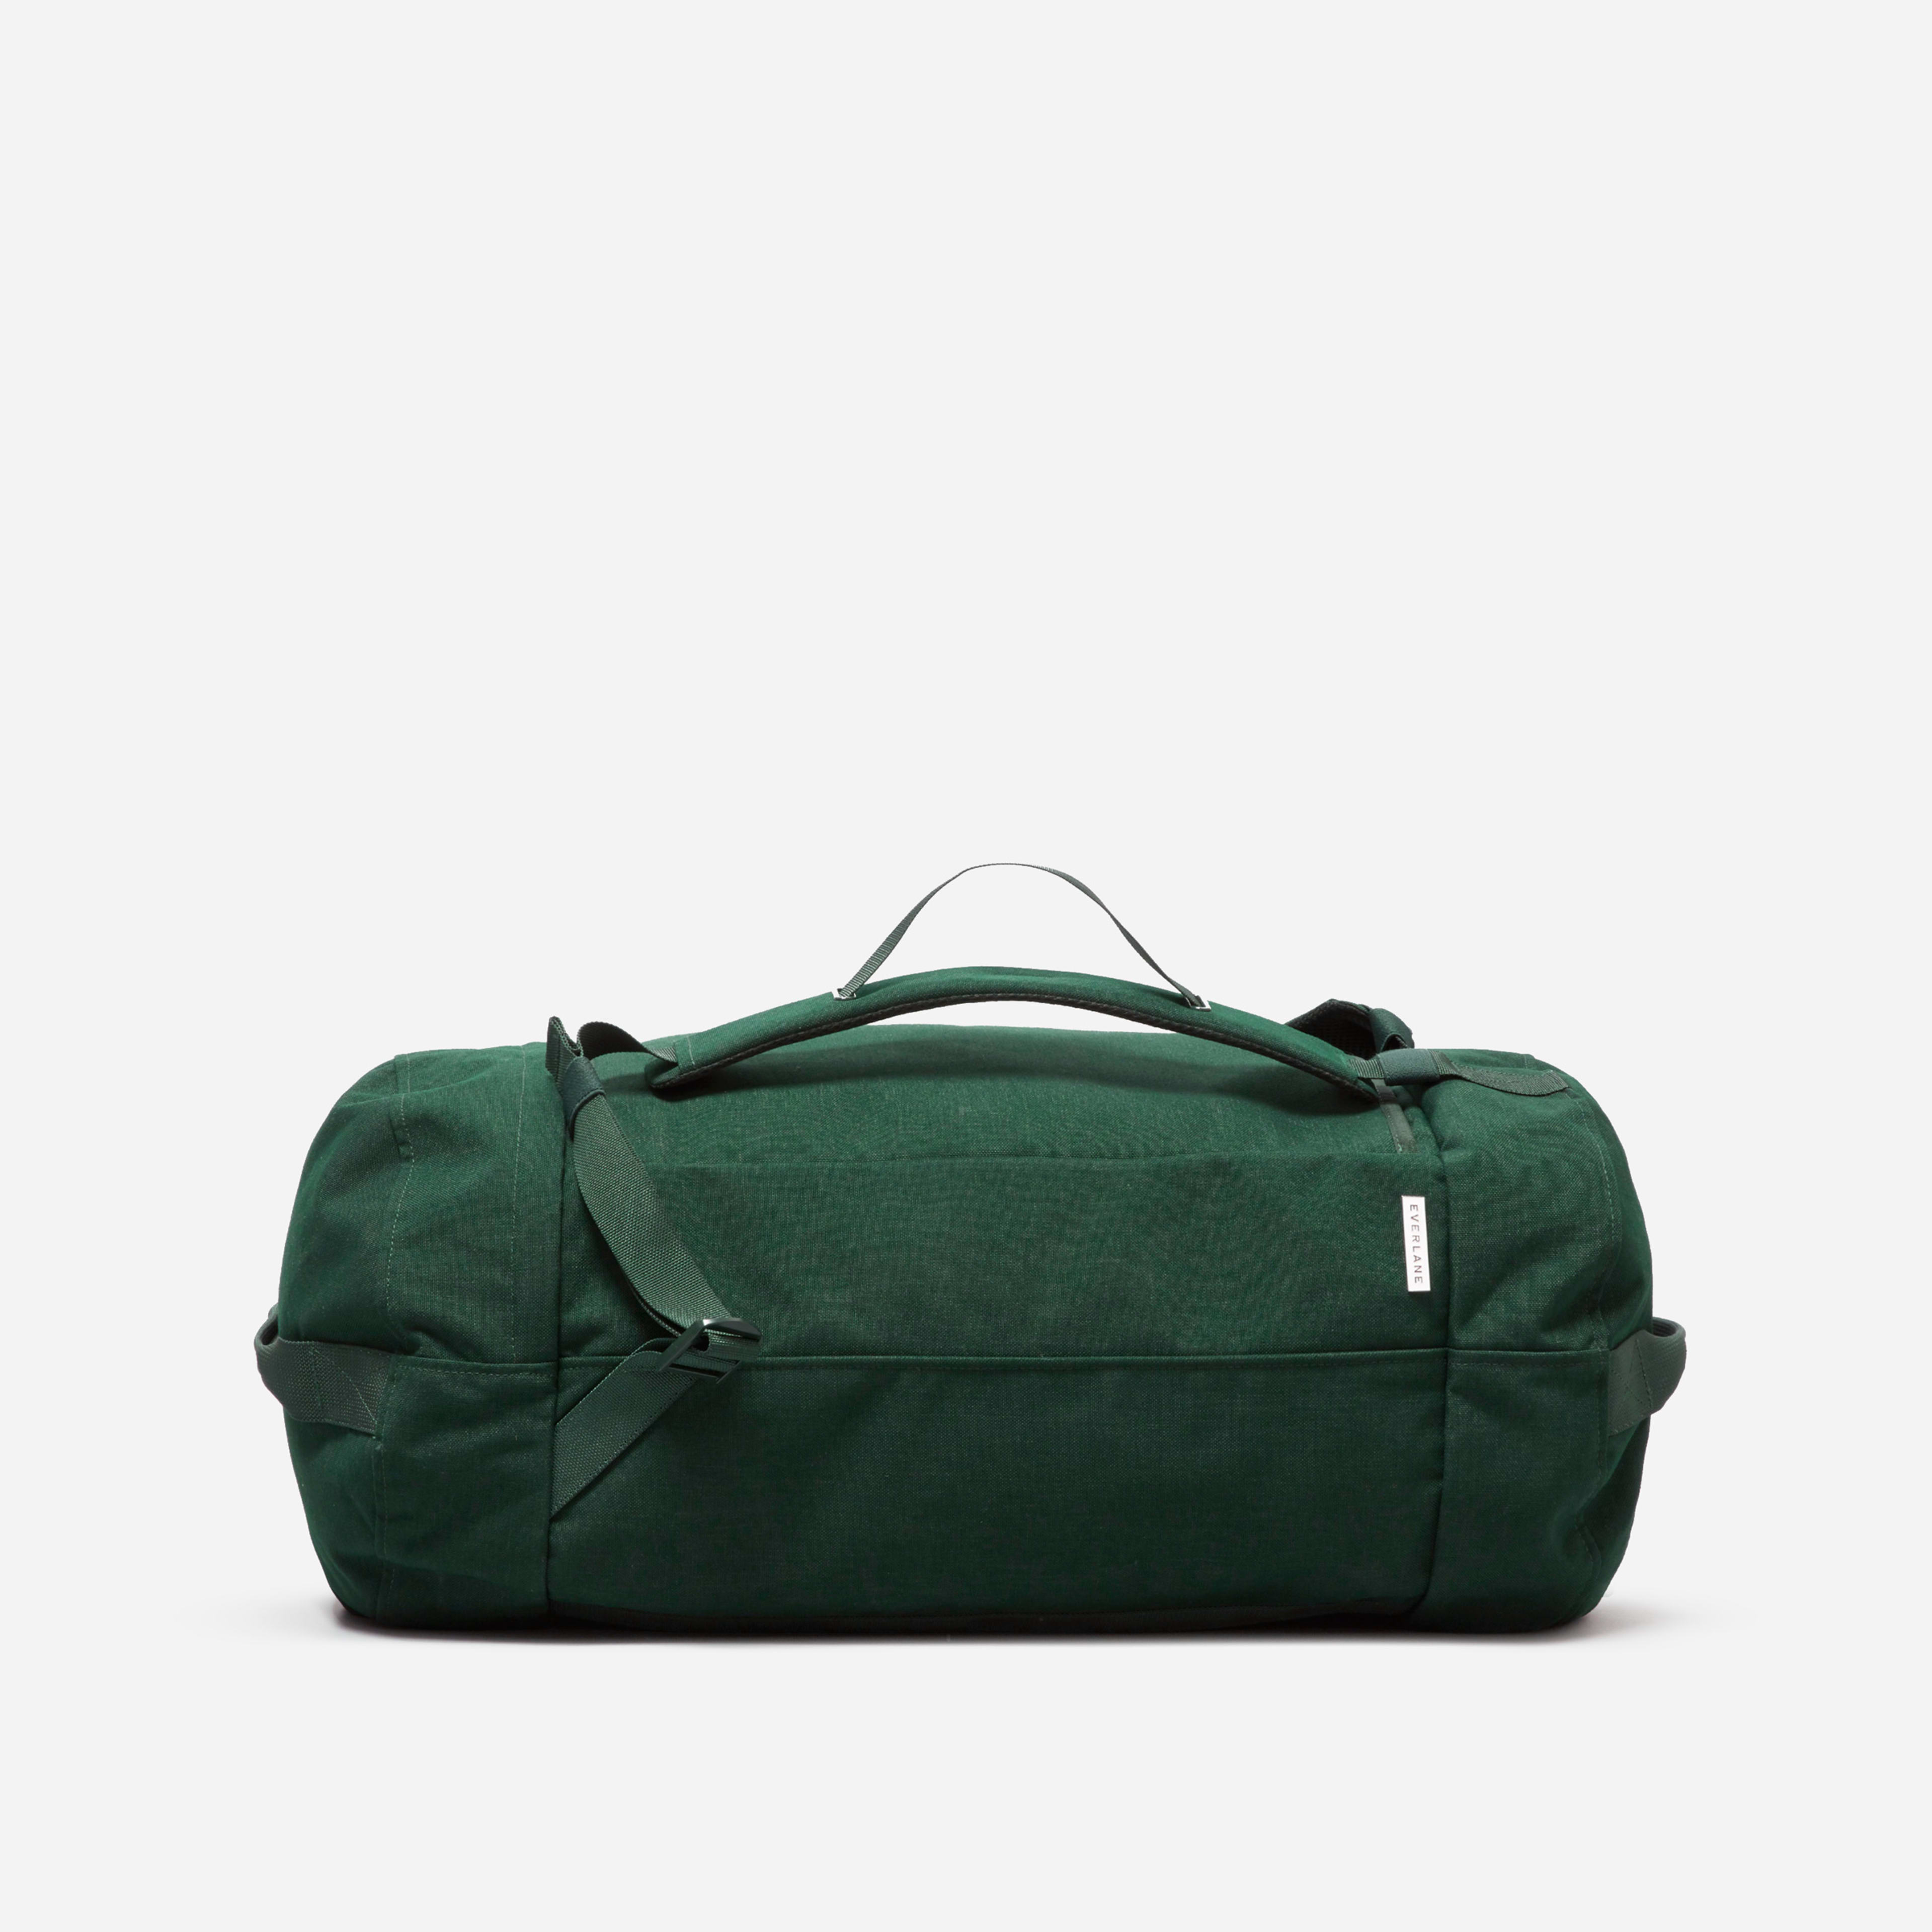 M mover bag